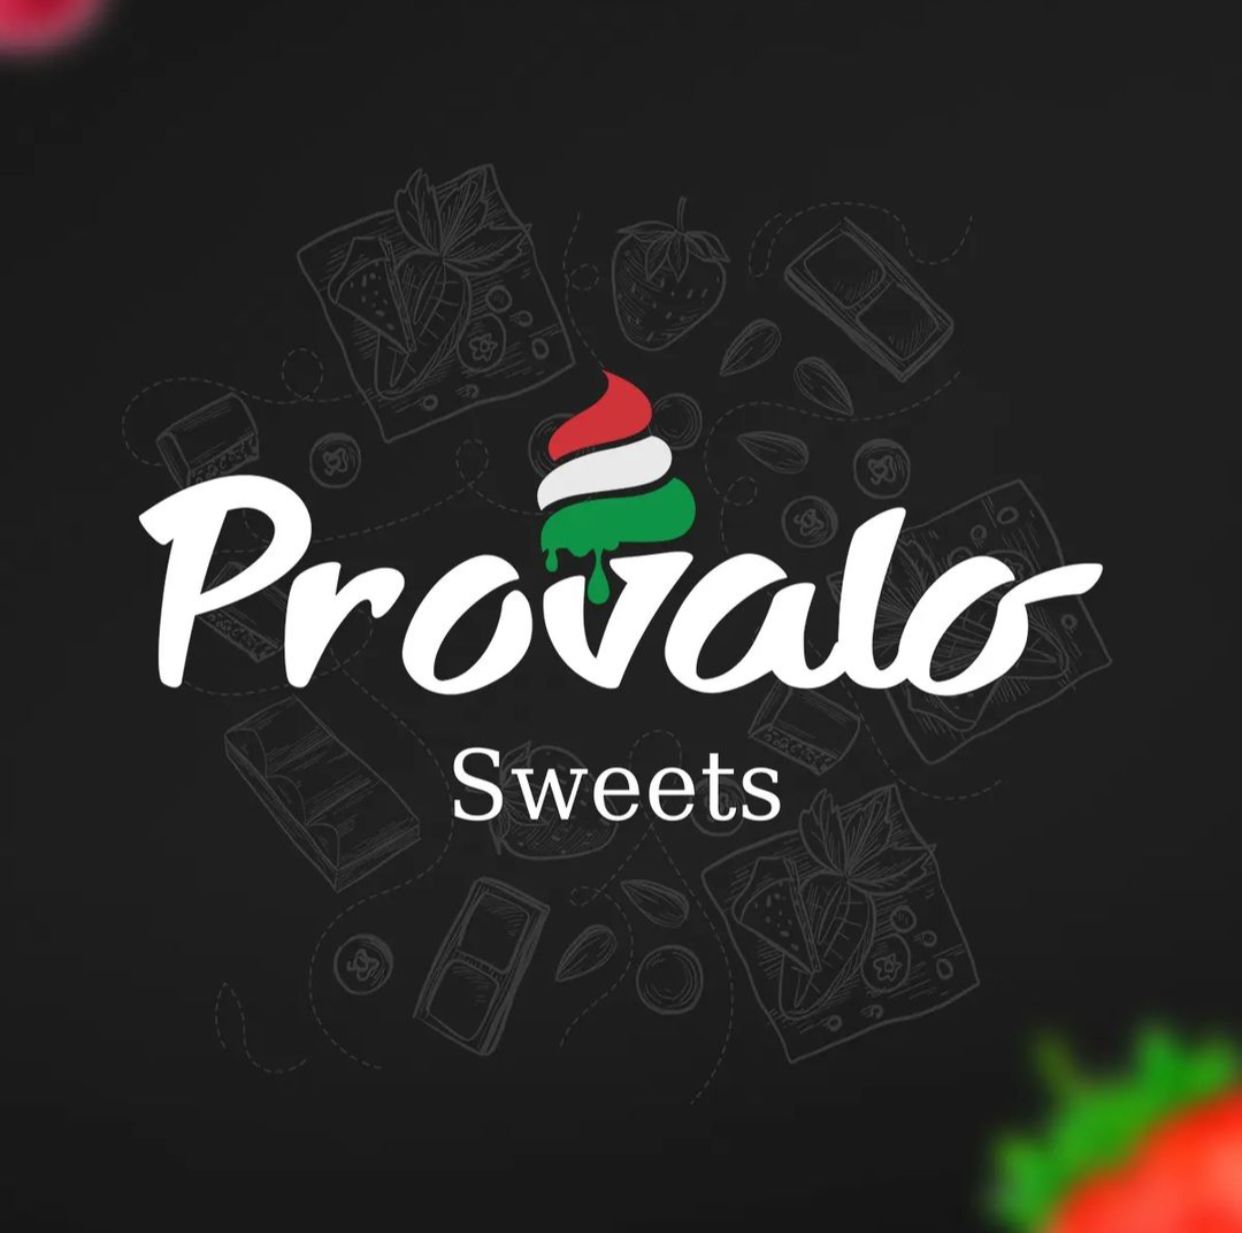 Provalo Sweets